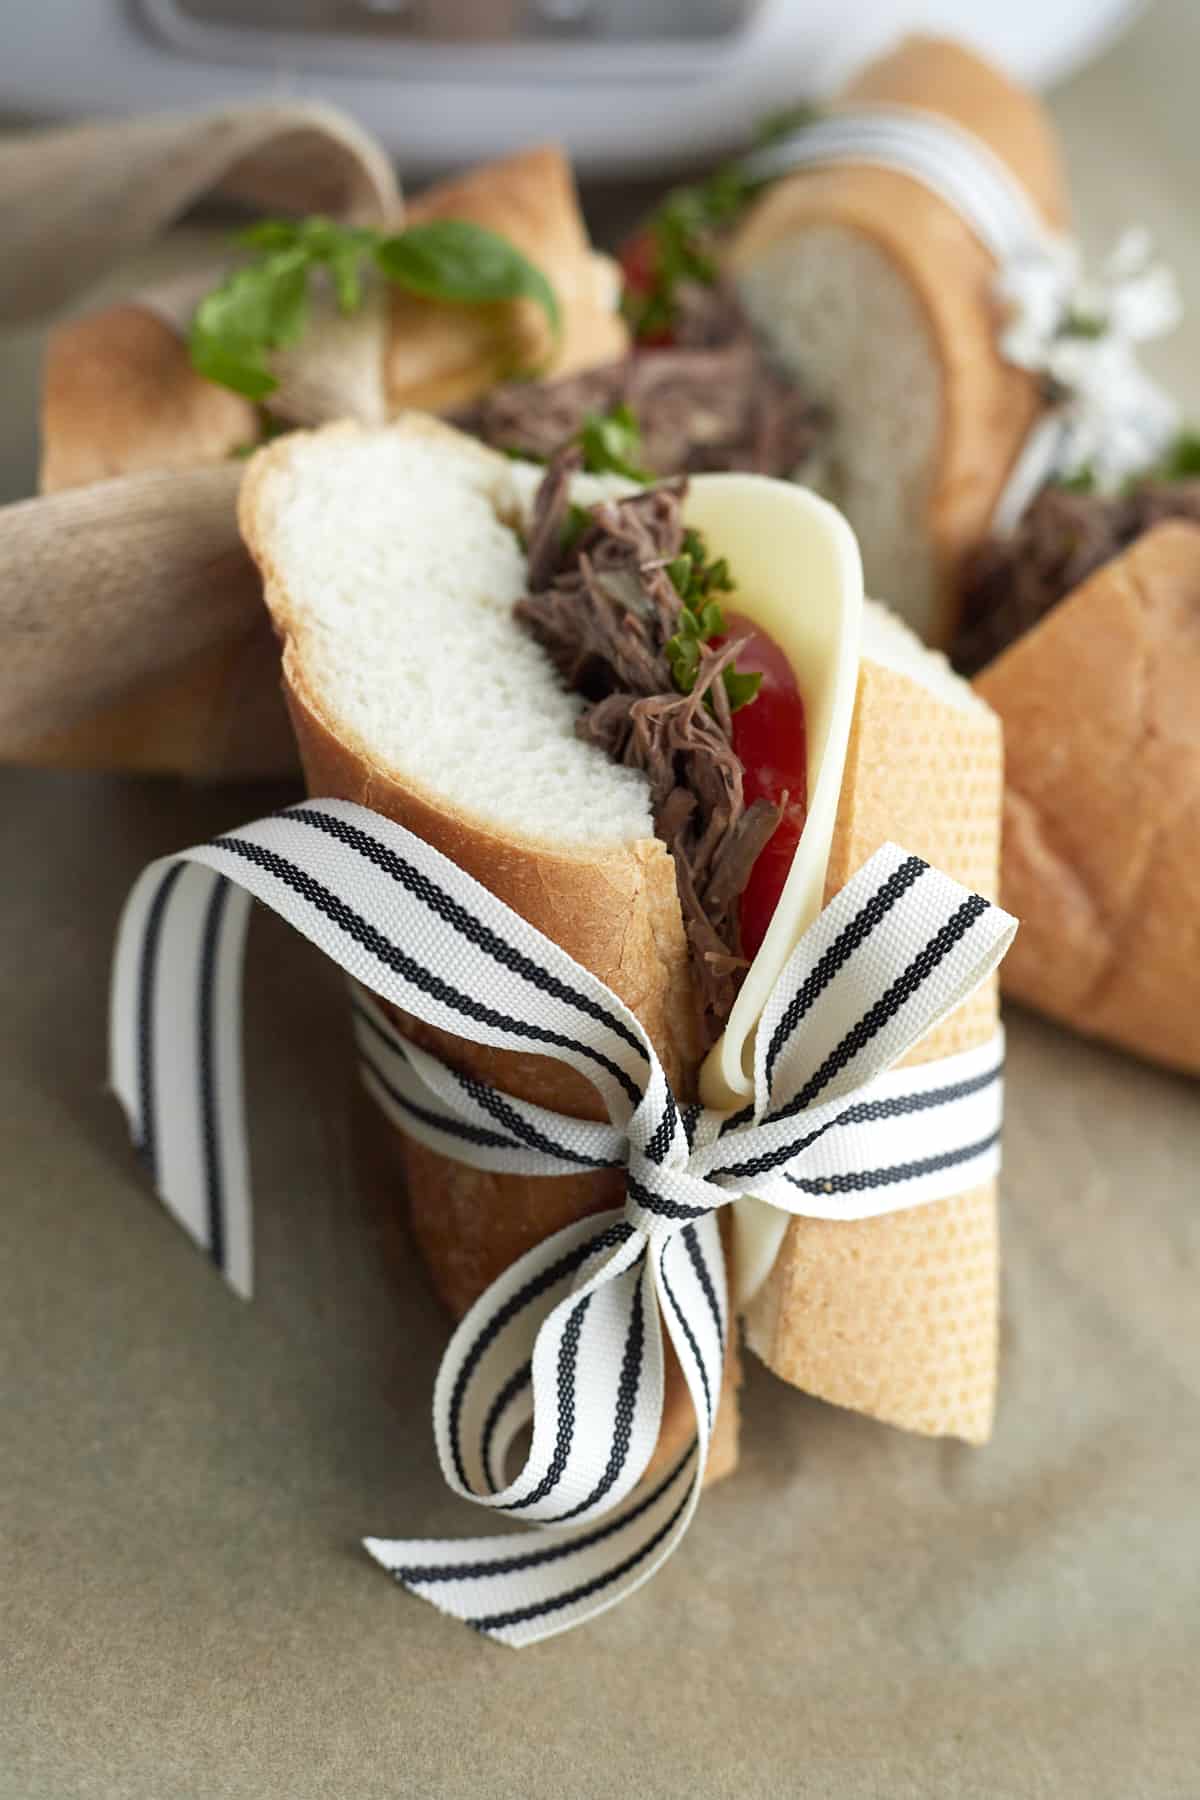 po' boy sandwich wrapped in blue and white ribbon